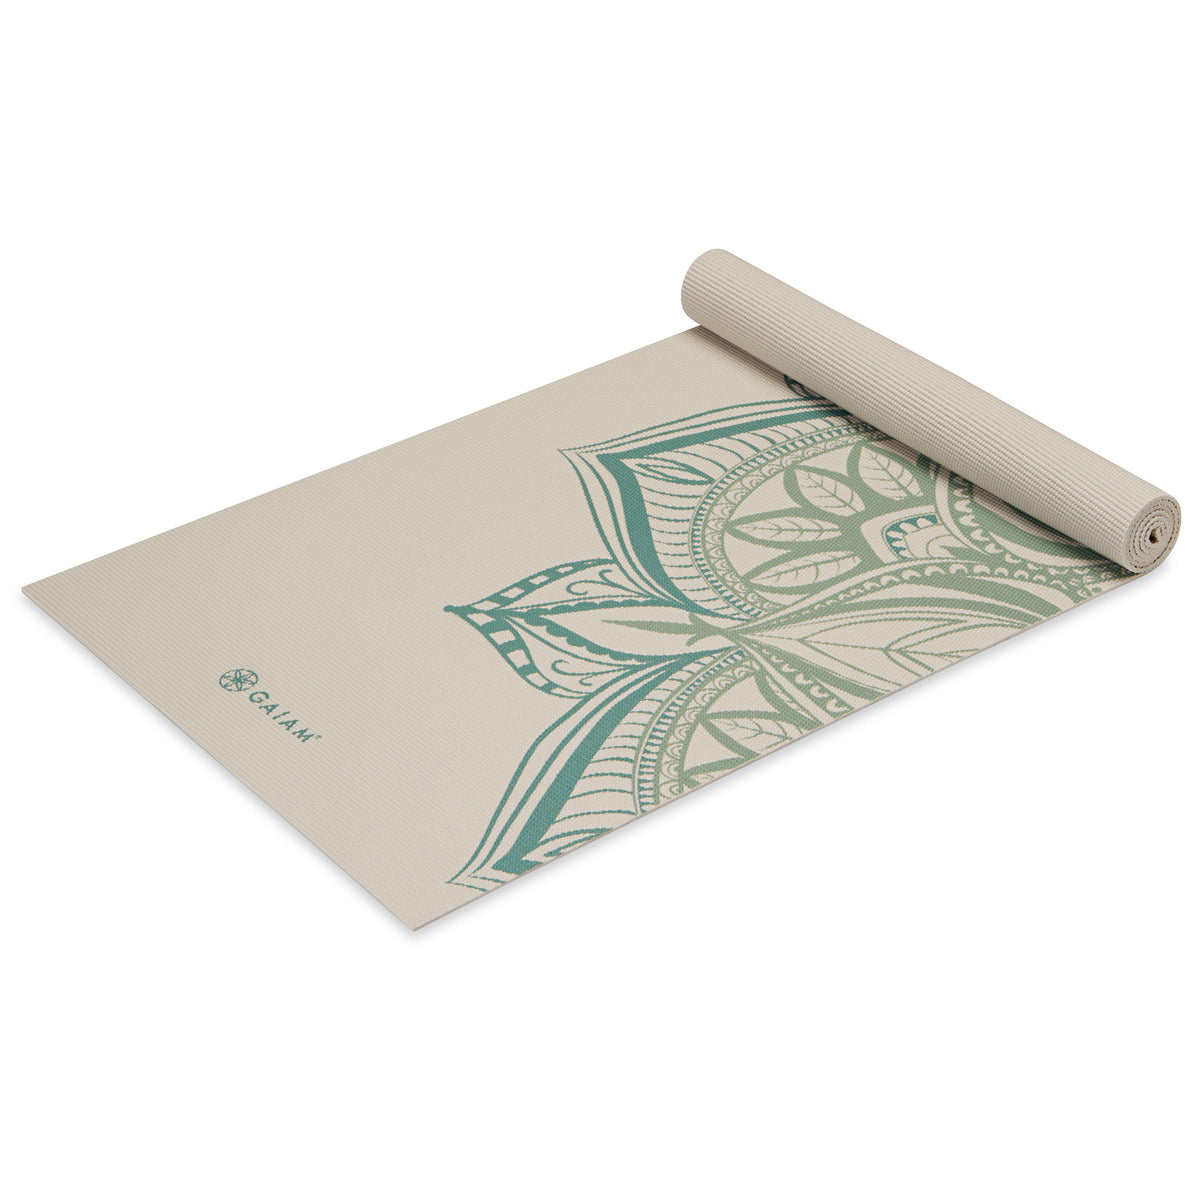 Gaiam Printed Point Yoga Mat (5mm) Vintage Green Point top rolled angle